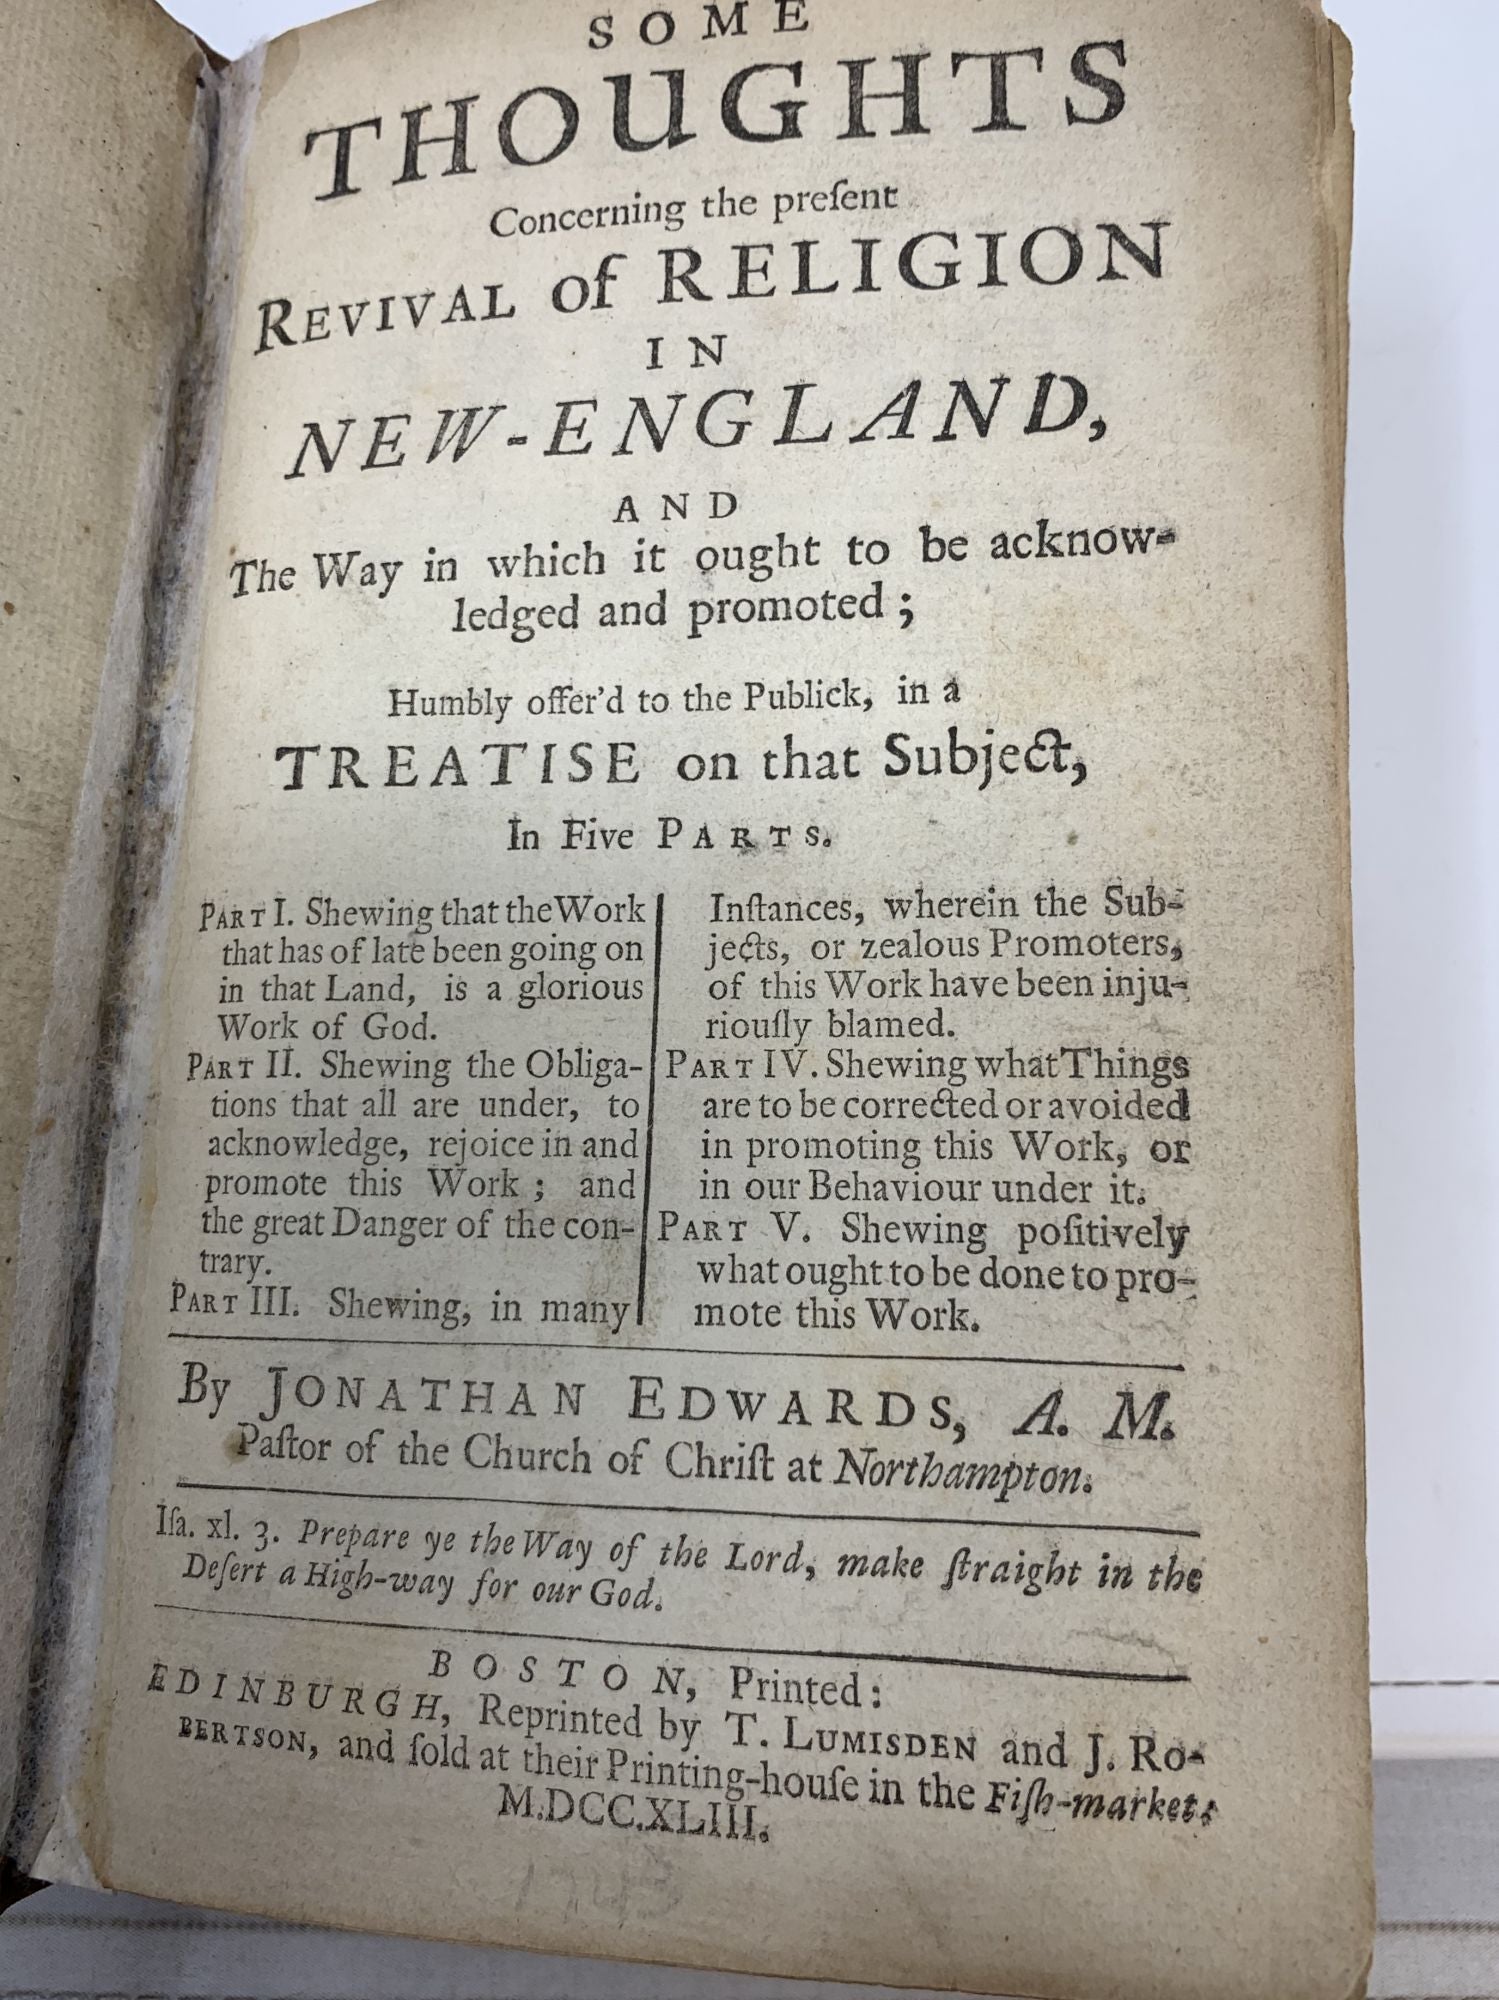 Edwards, Jonathan - Some Thoughts Concerning the Present Revival of Religion in New-England, and the Way in Which It Ought to Be Acknowledged and Promoted; Humbly Offer'd to the Publick in a Treatise on That Subject, in Five Parts; Part I. Shewing That the Work That Has of Late Been Going on in That Land, Is a Glorious Work of God; Part II: Shewing the Obligations That All Are Under, to Acknowledge, Rejoice in and Prmote This Work; and the Great Danger of the Contrary; Part III: Shewing, in Many Instances, Wherein the Subjects, or Zealous Promoters, of This Work Have Been Injuriously Blamed; Part IV: Shewing What Things Are to Be Corrected or Avoided in Promooting This Work, or in Our Behaviour. Under It; Part V: Shewing Positively What Ought to Be Done to Promote This Work